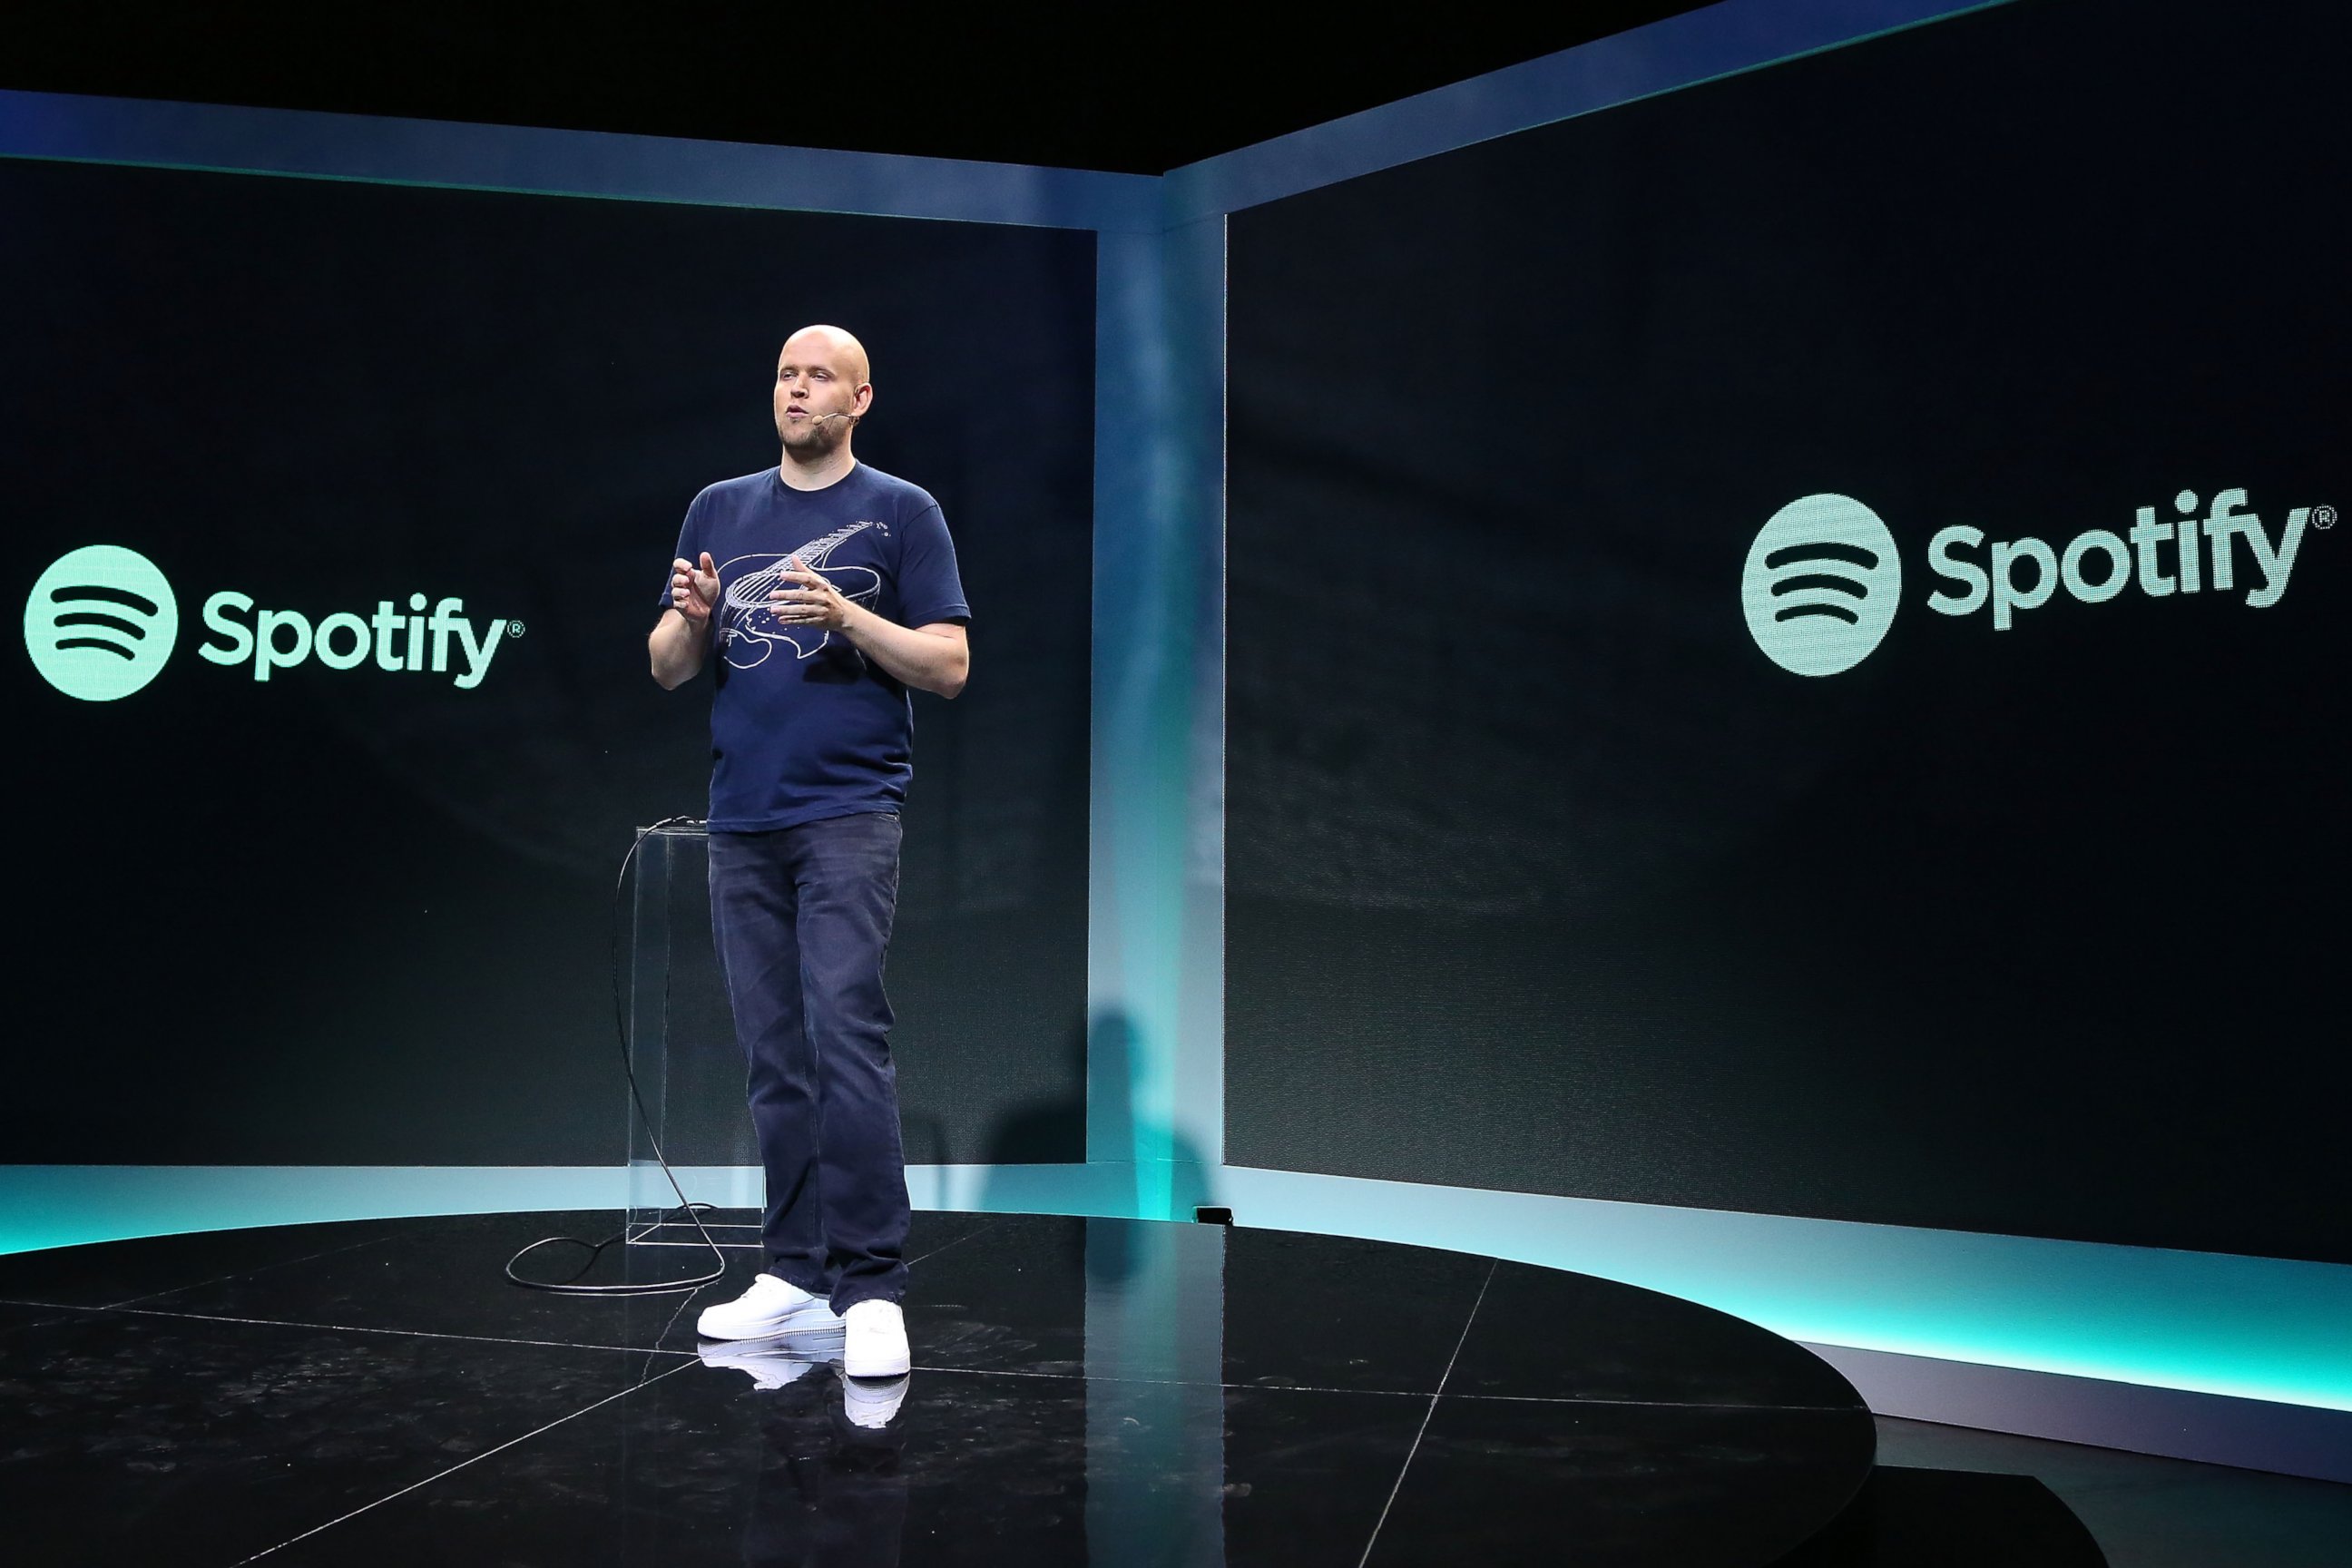 PHOTO: Spotify founder Daniel Ek speaks during the Spotify New Platform Launch at S.I.R. Studios on May 20, 2015 in New York City. 